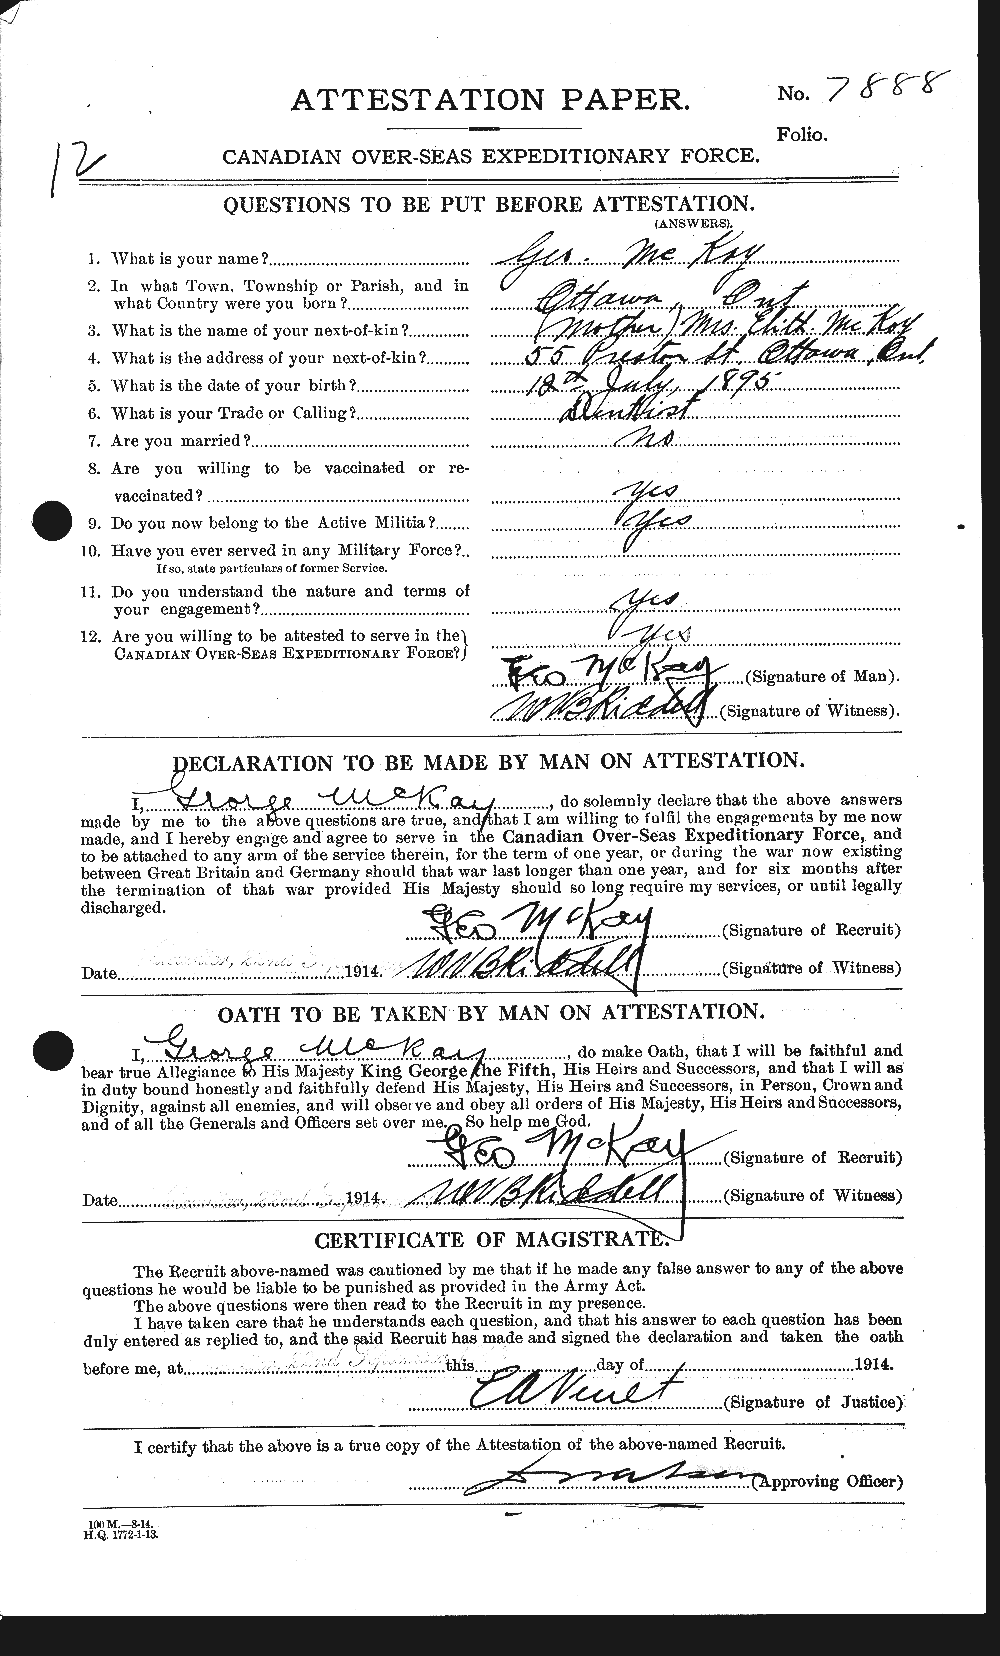 Personnel Records of the First World War - CEF 534643a